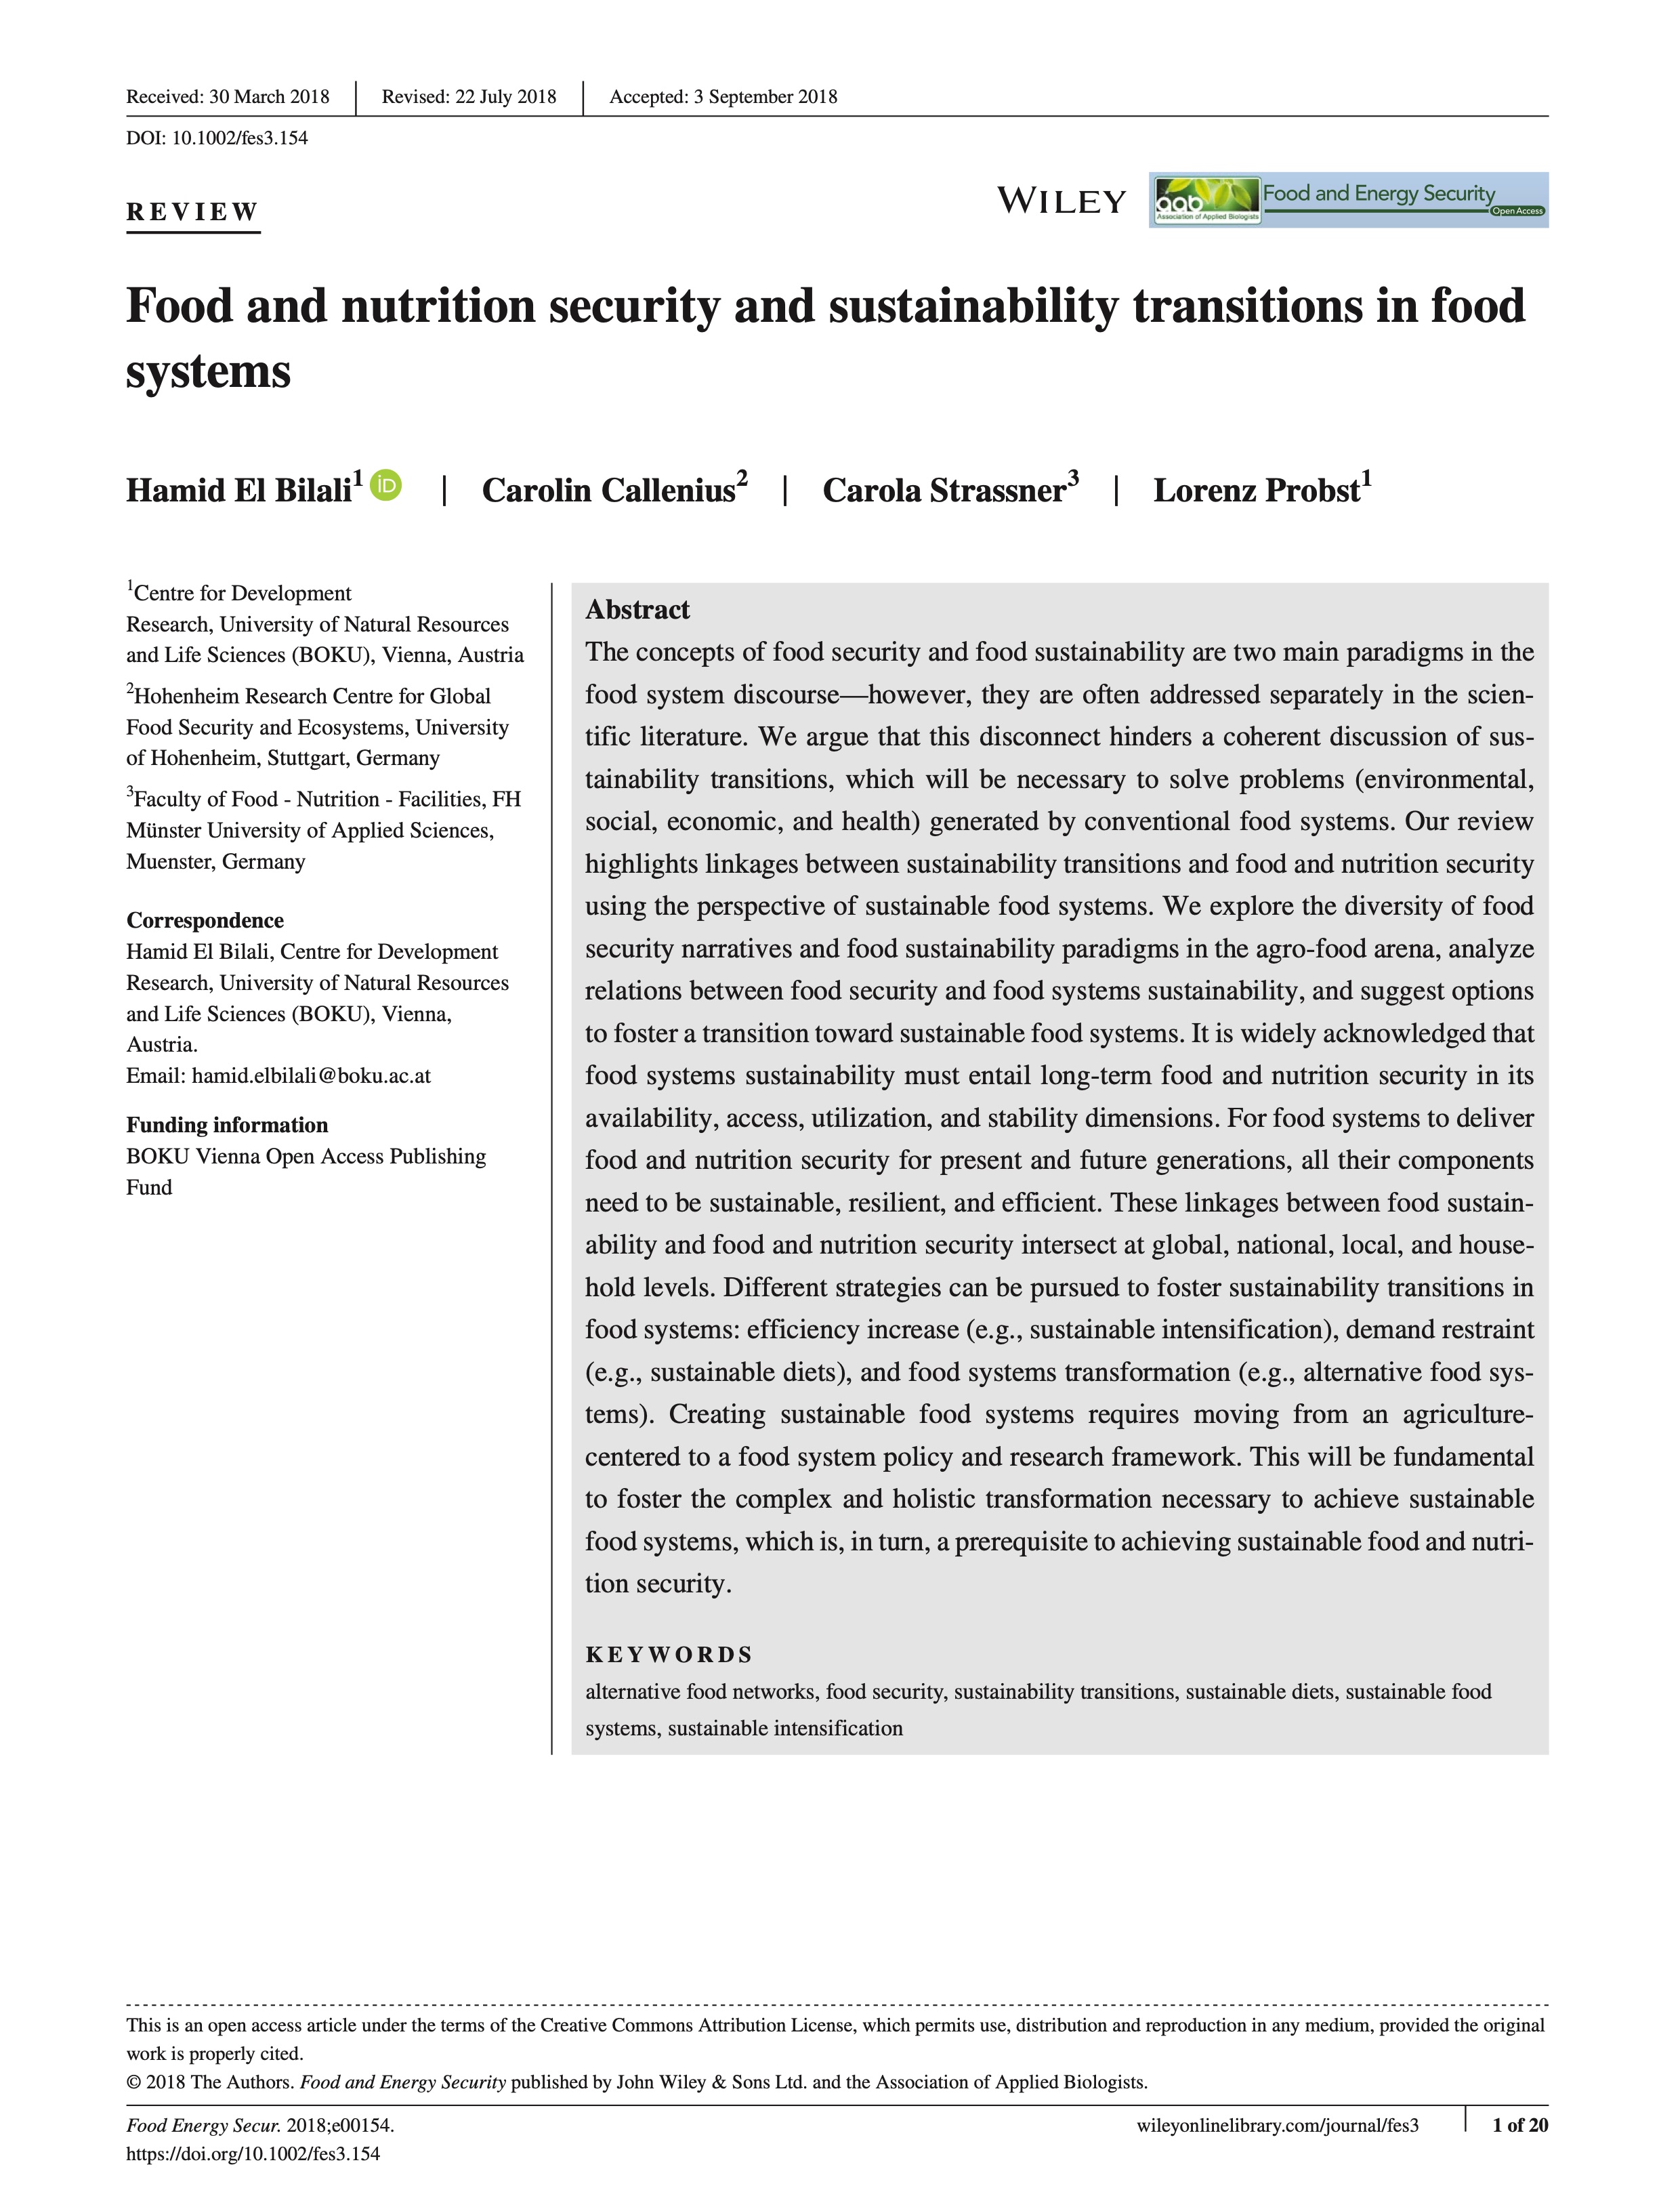 Food and nutrition security and sustainability transitions in food systems